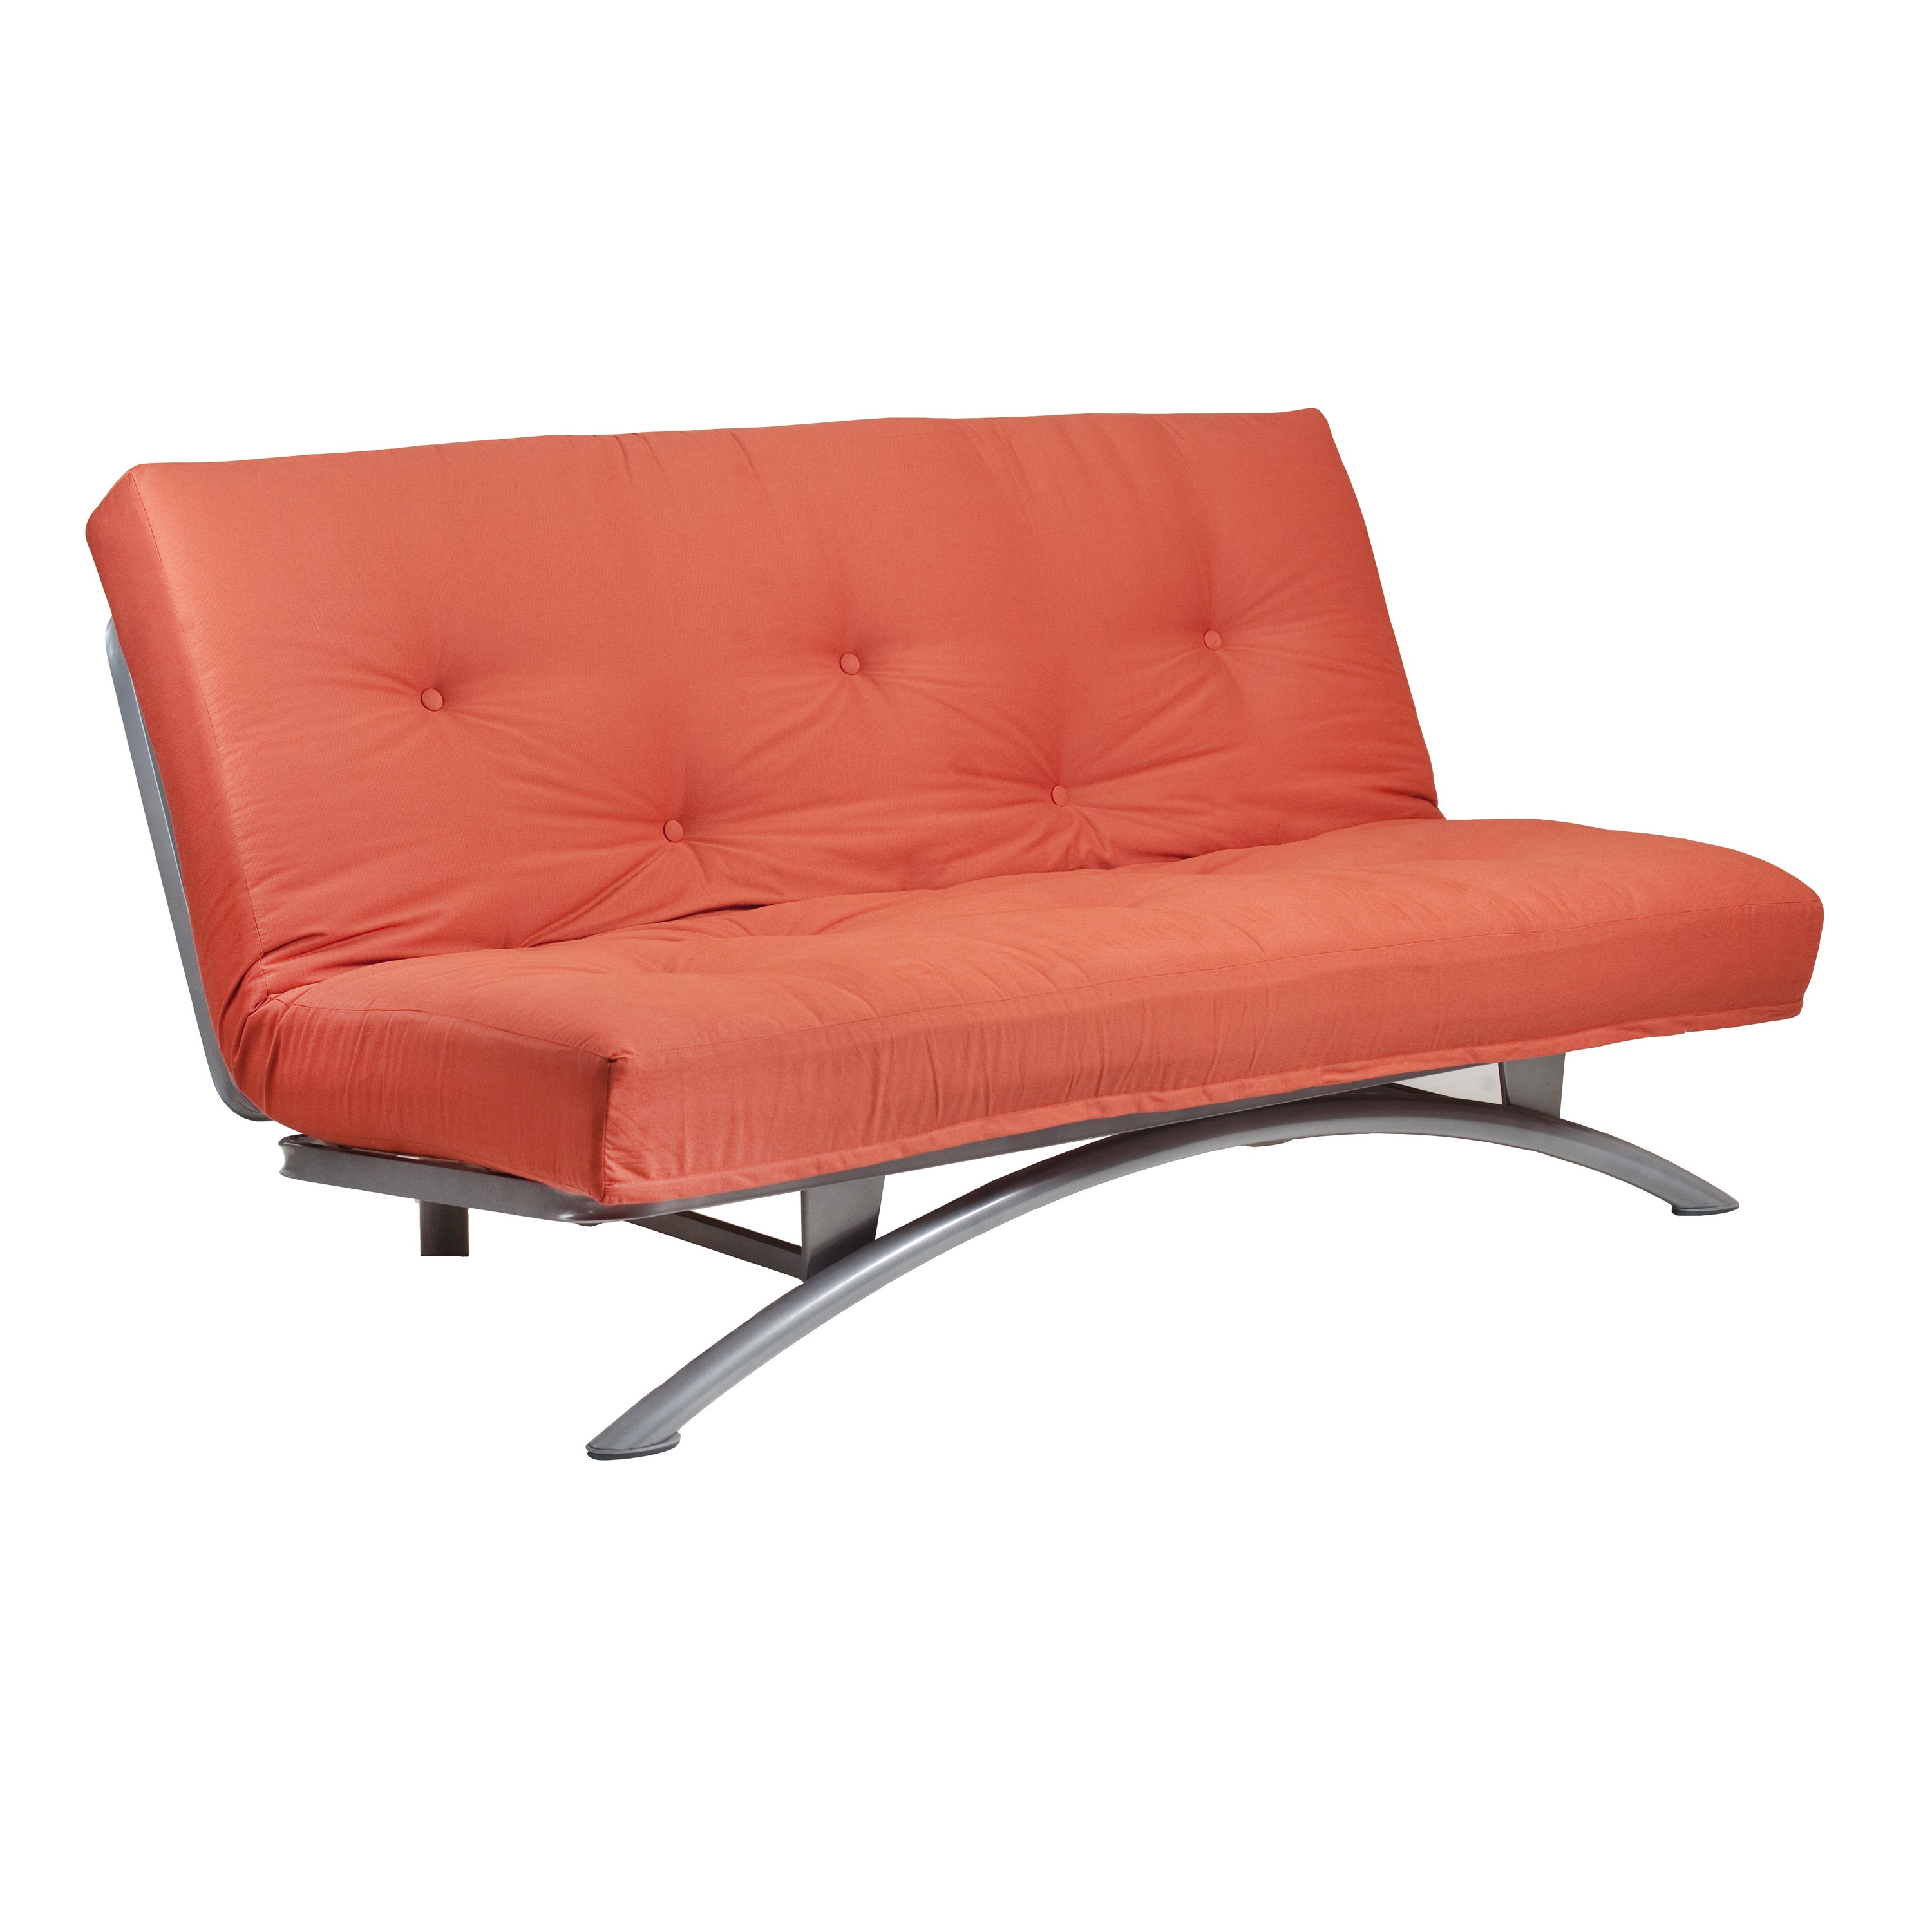 You are currently viewing The Clic-Clac Futon frame